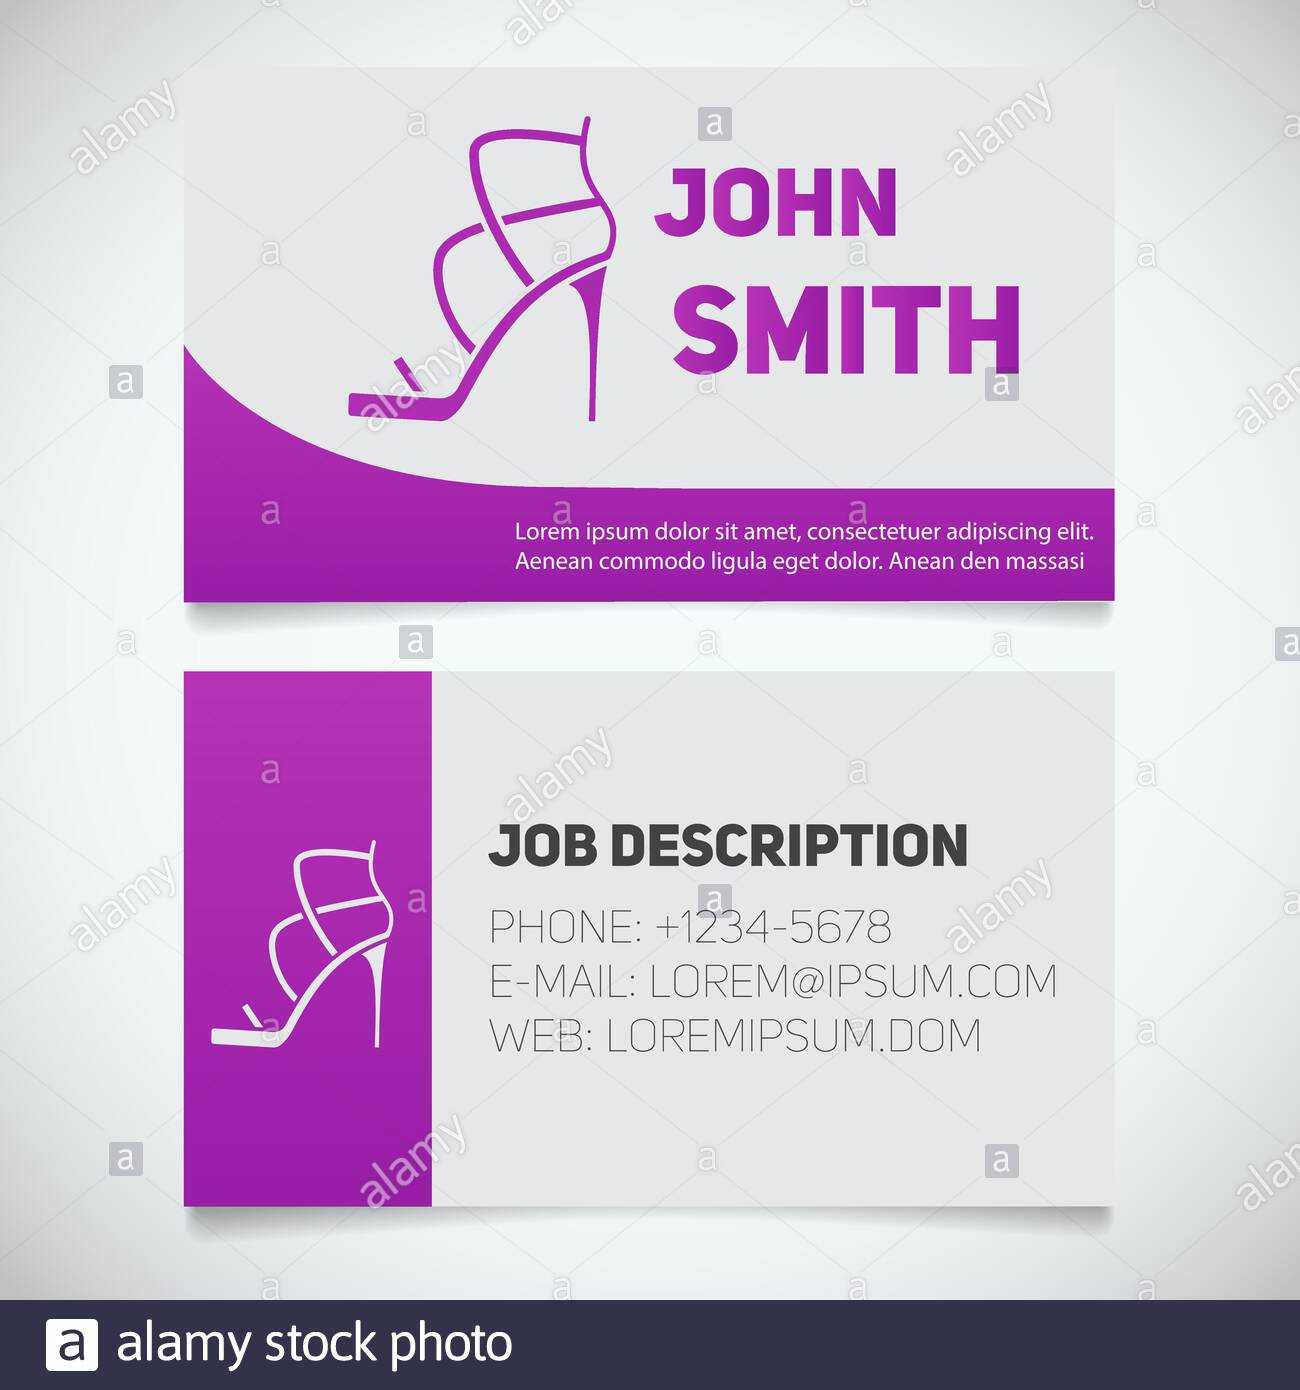 Business Card Print Template With High Heel Shoe Logo Intended For High Heel Shoe Template For Card